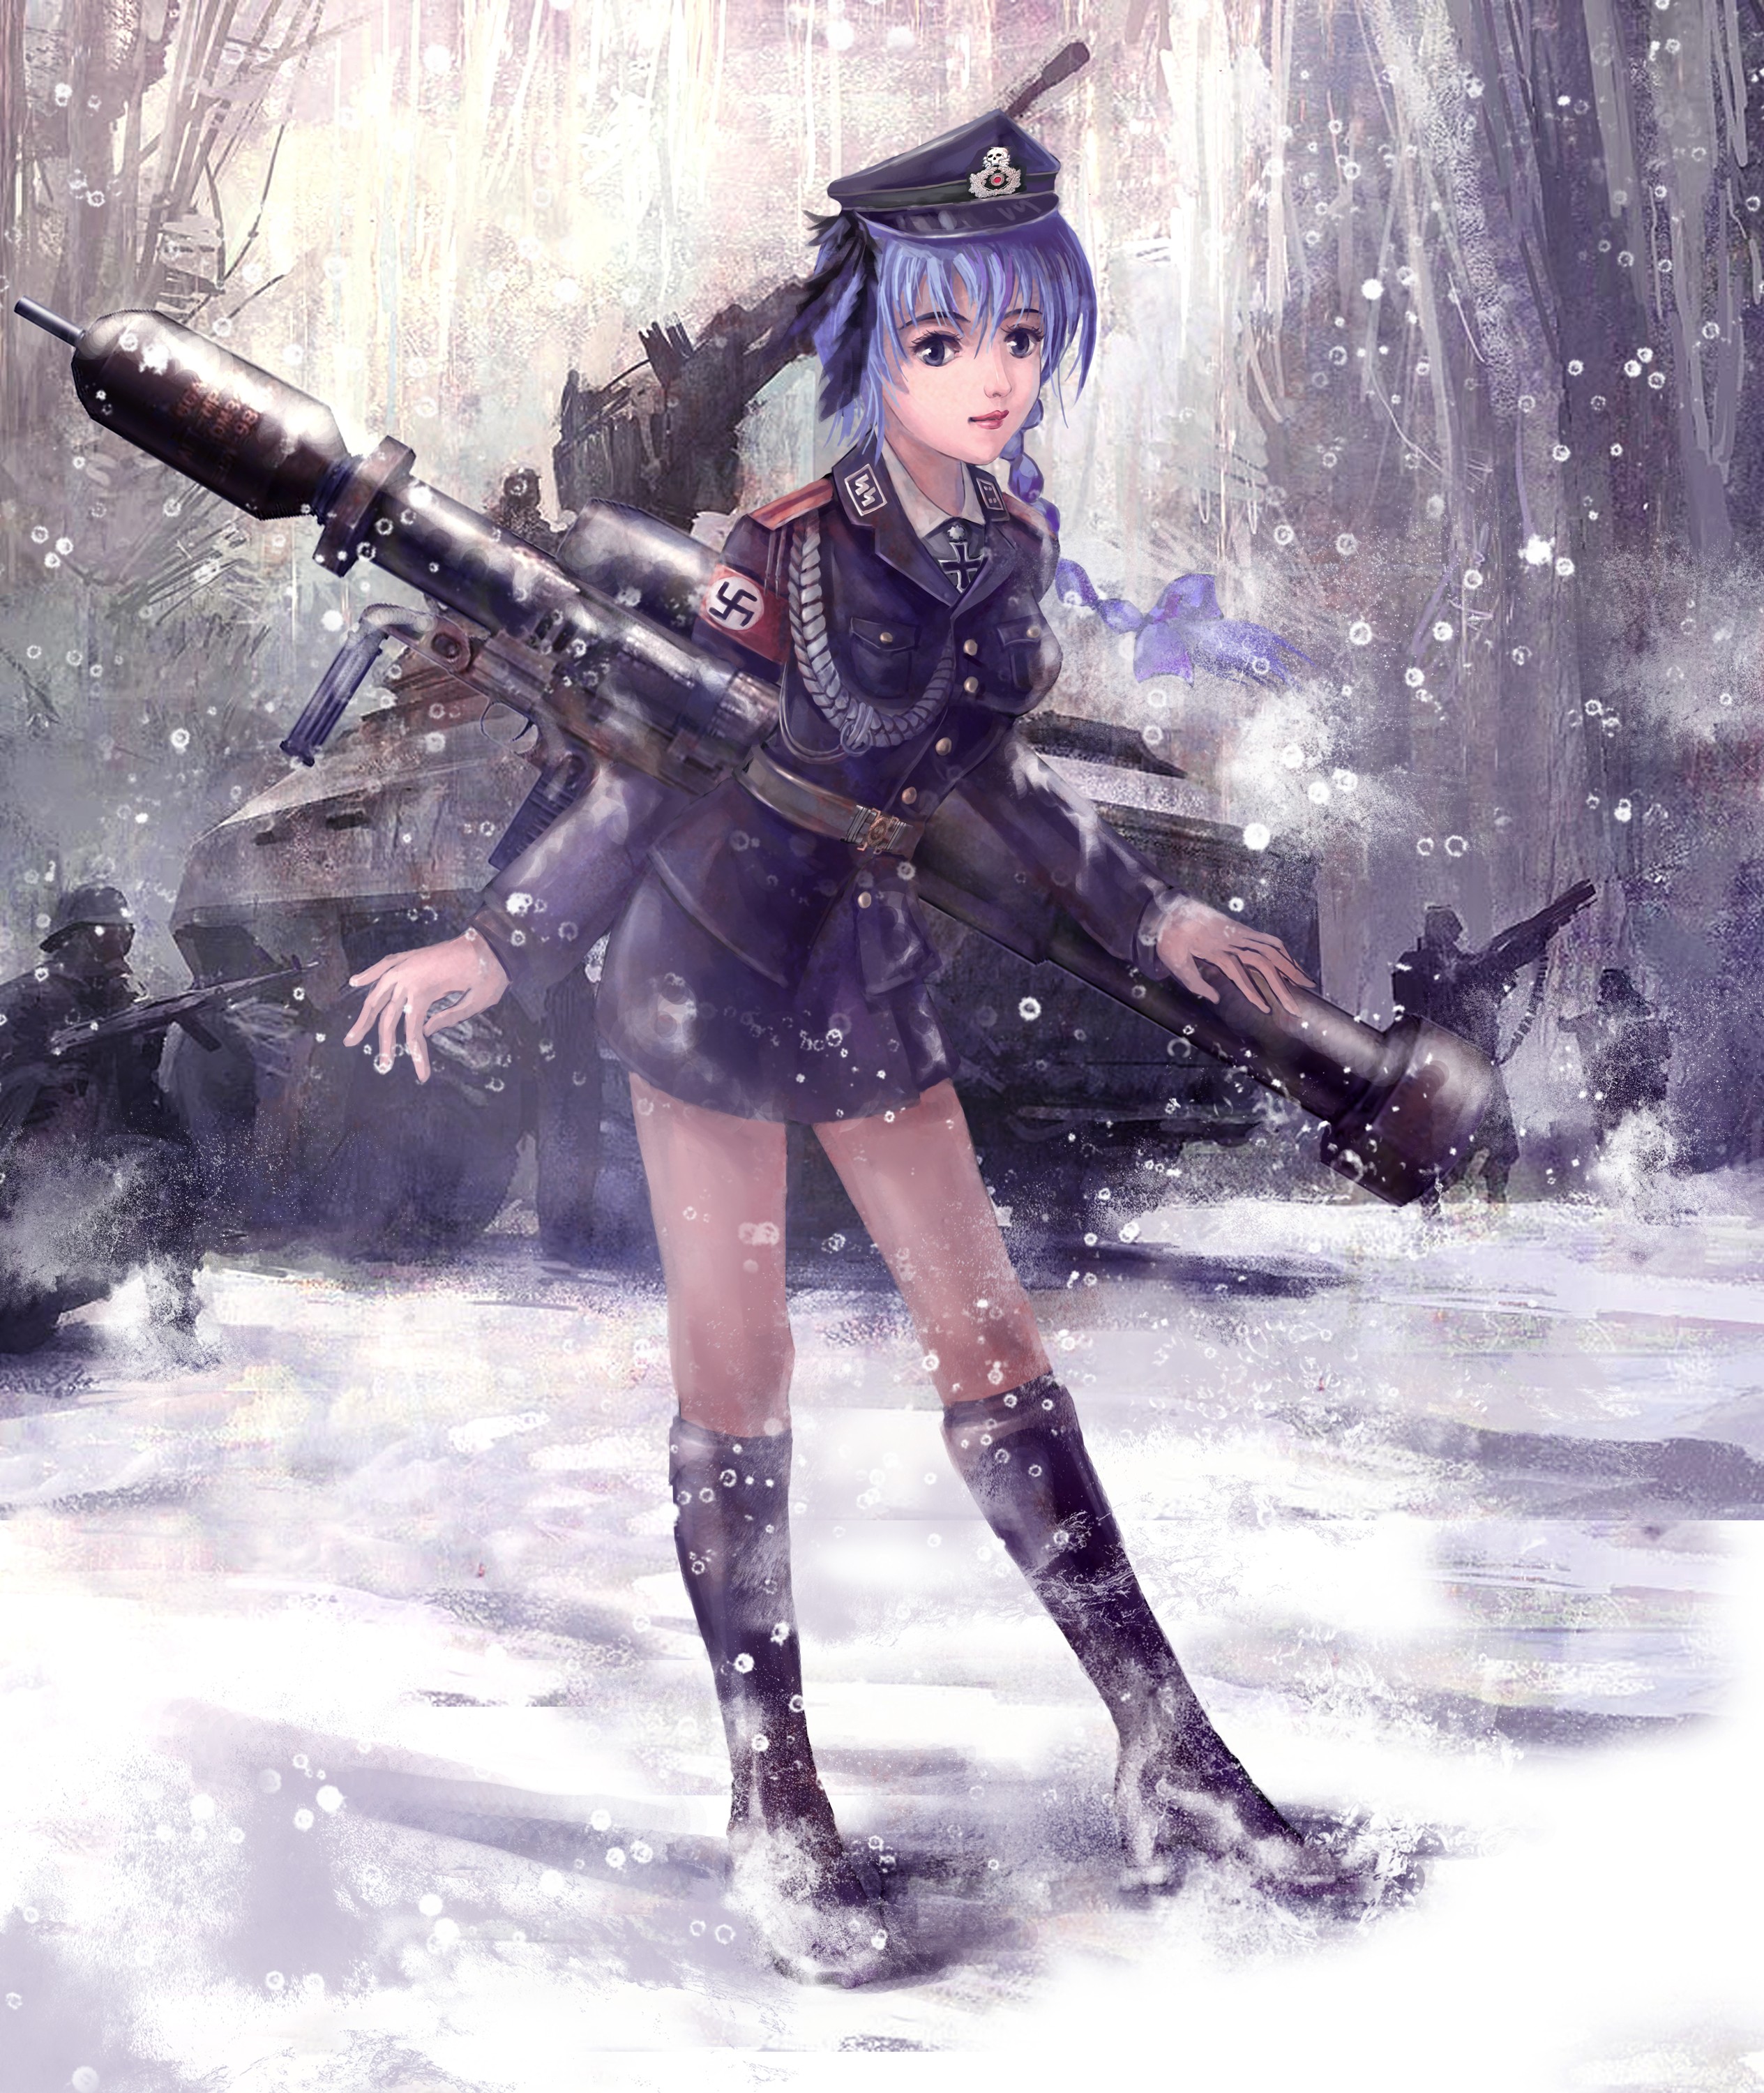 boots, winter, snow, uniforms, guns, army, military, blue eyes